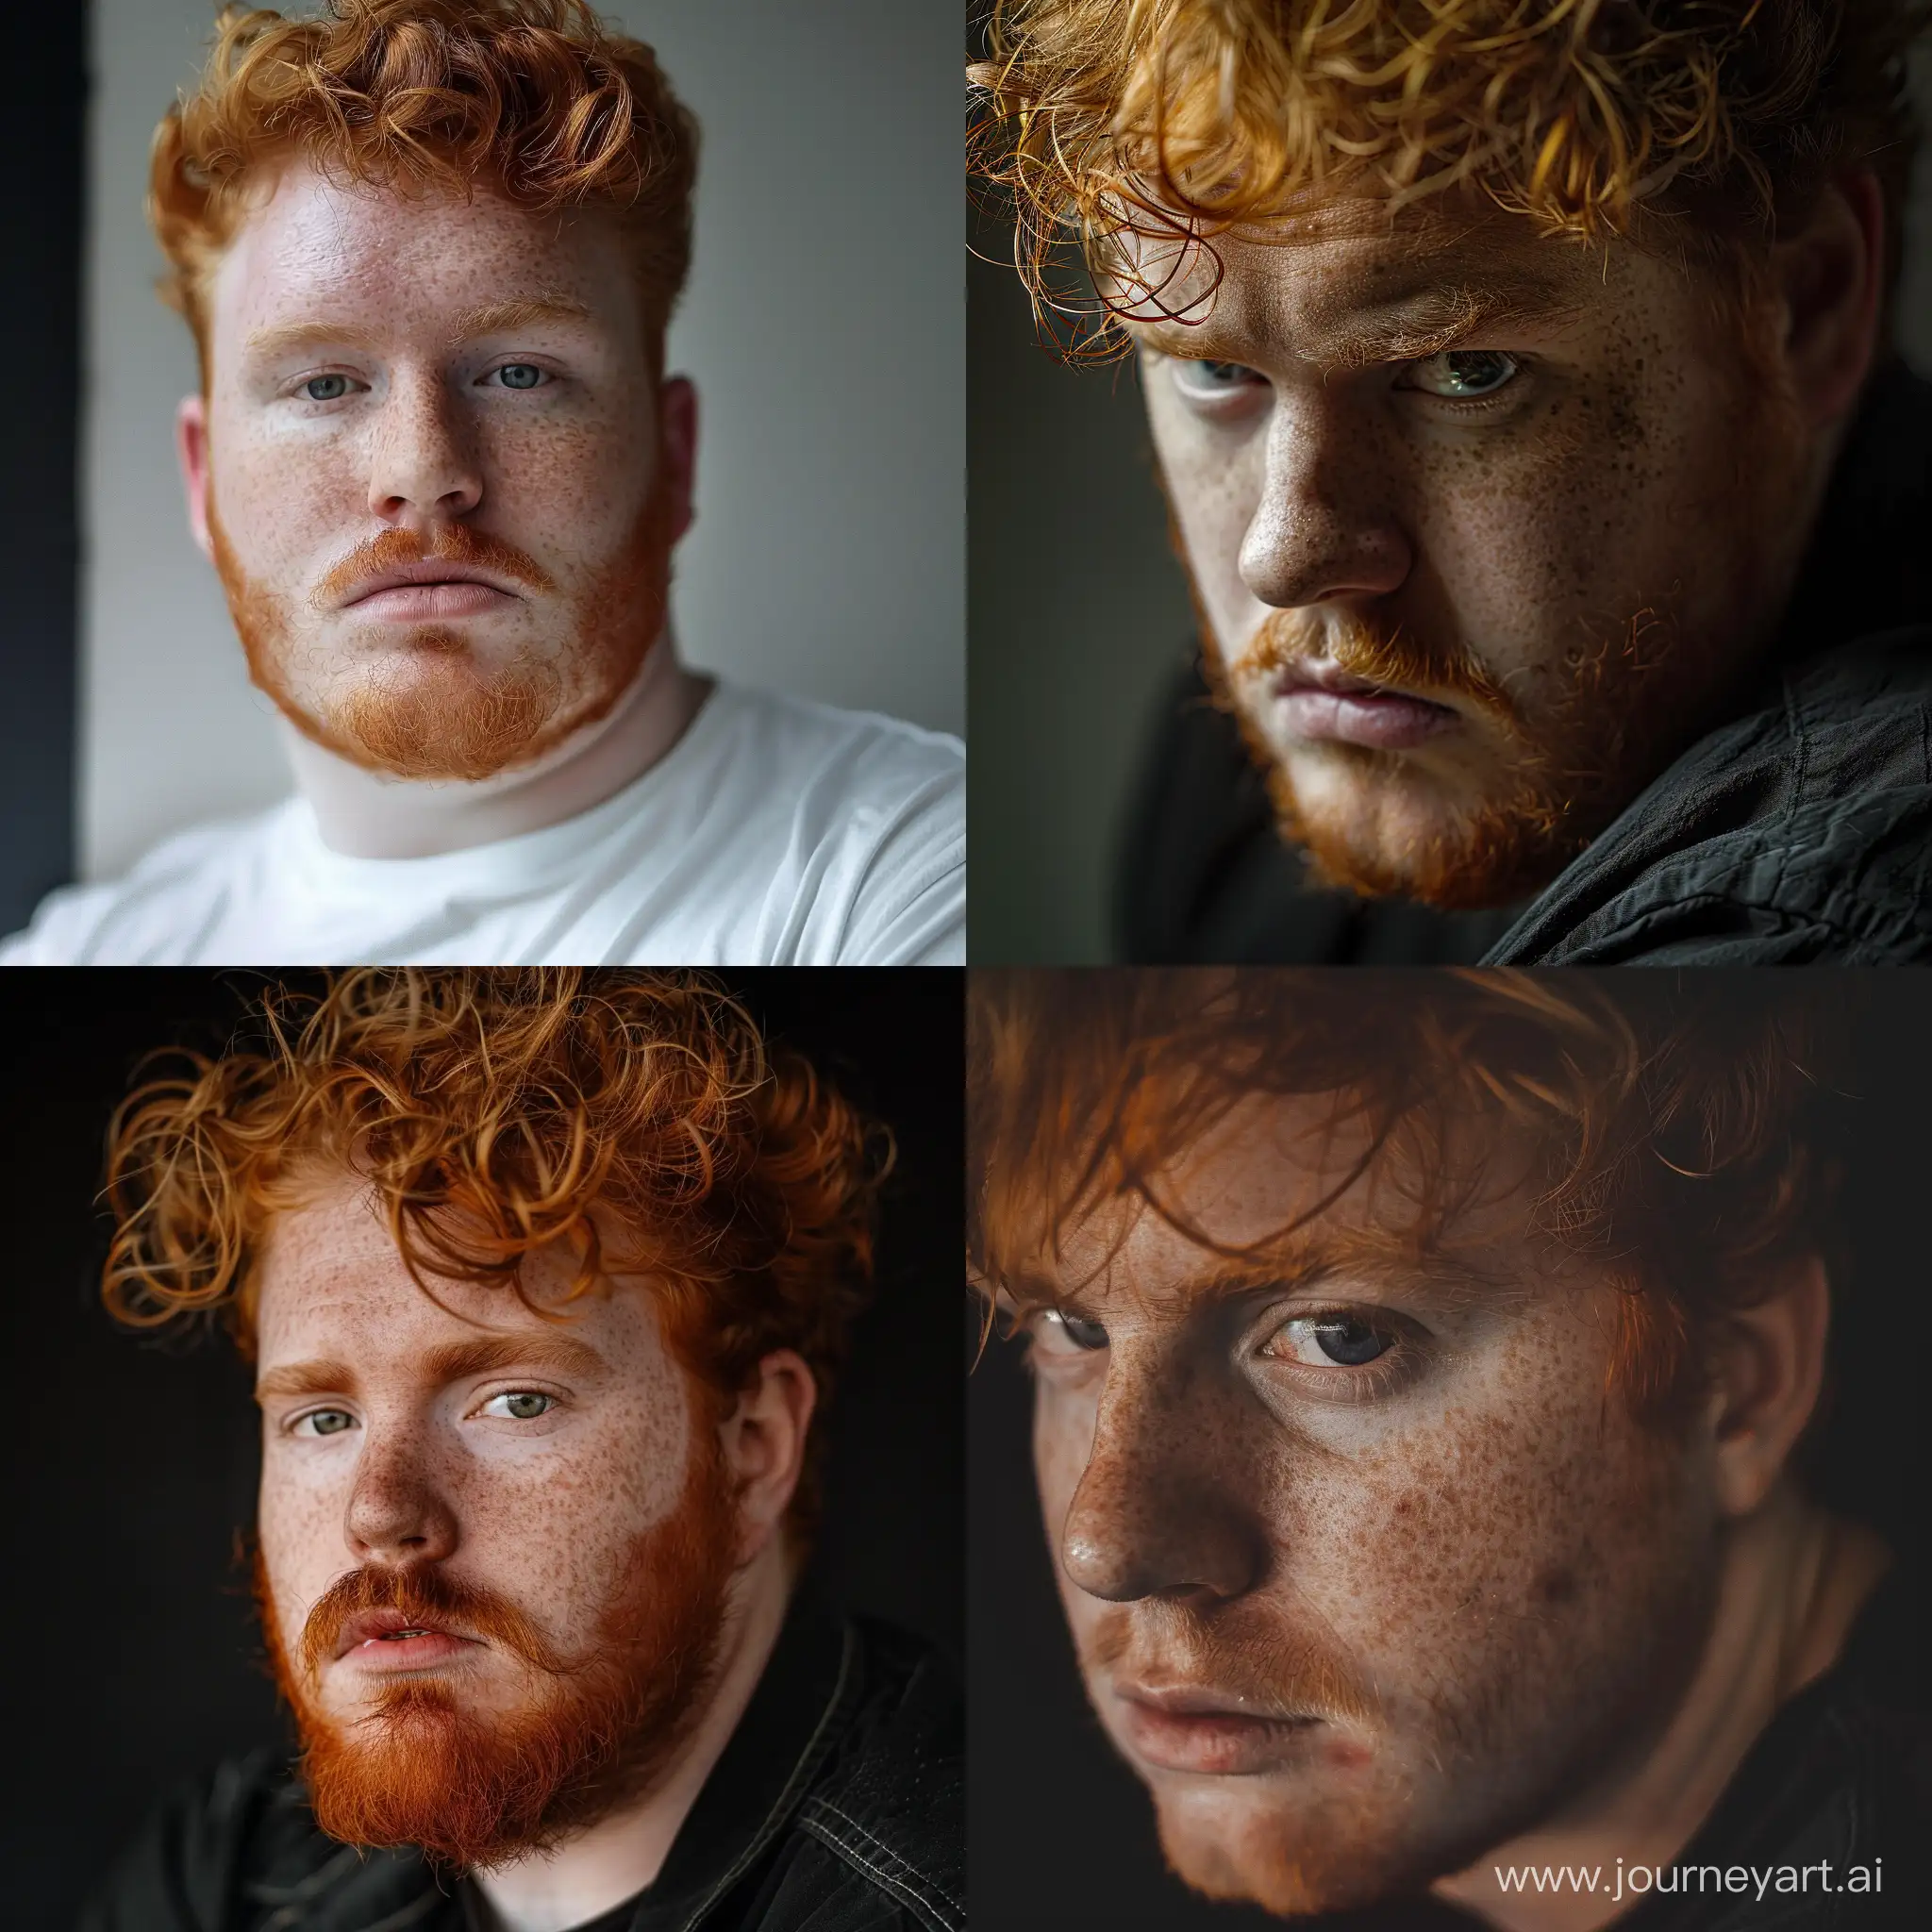 Intense-Portrait-of-a-RedHaired-Man-with-a-Menacing-Look